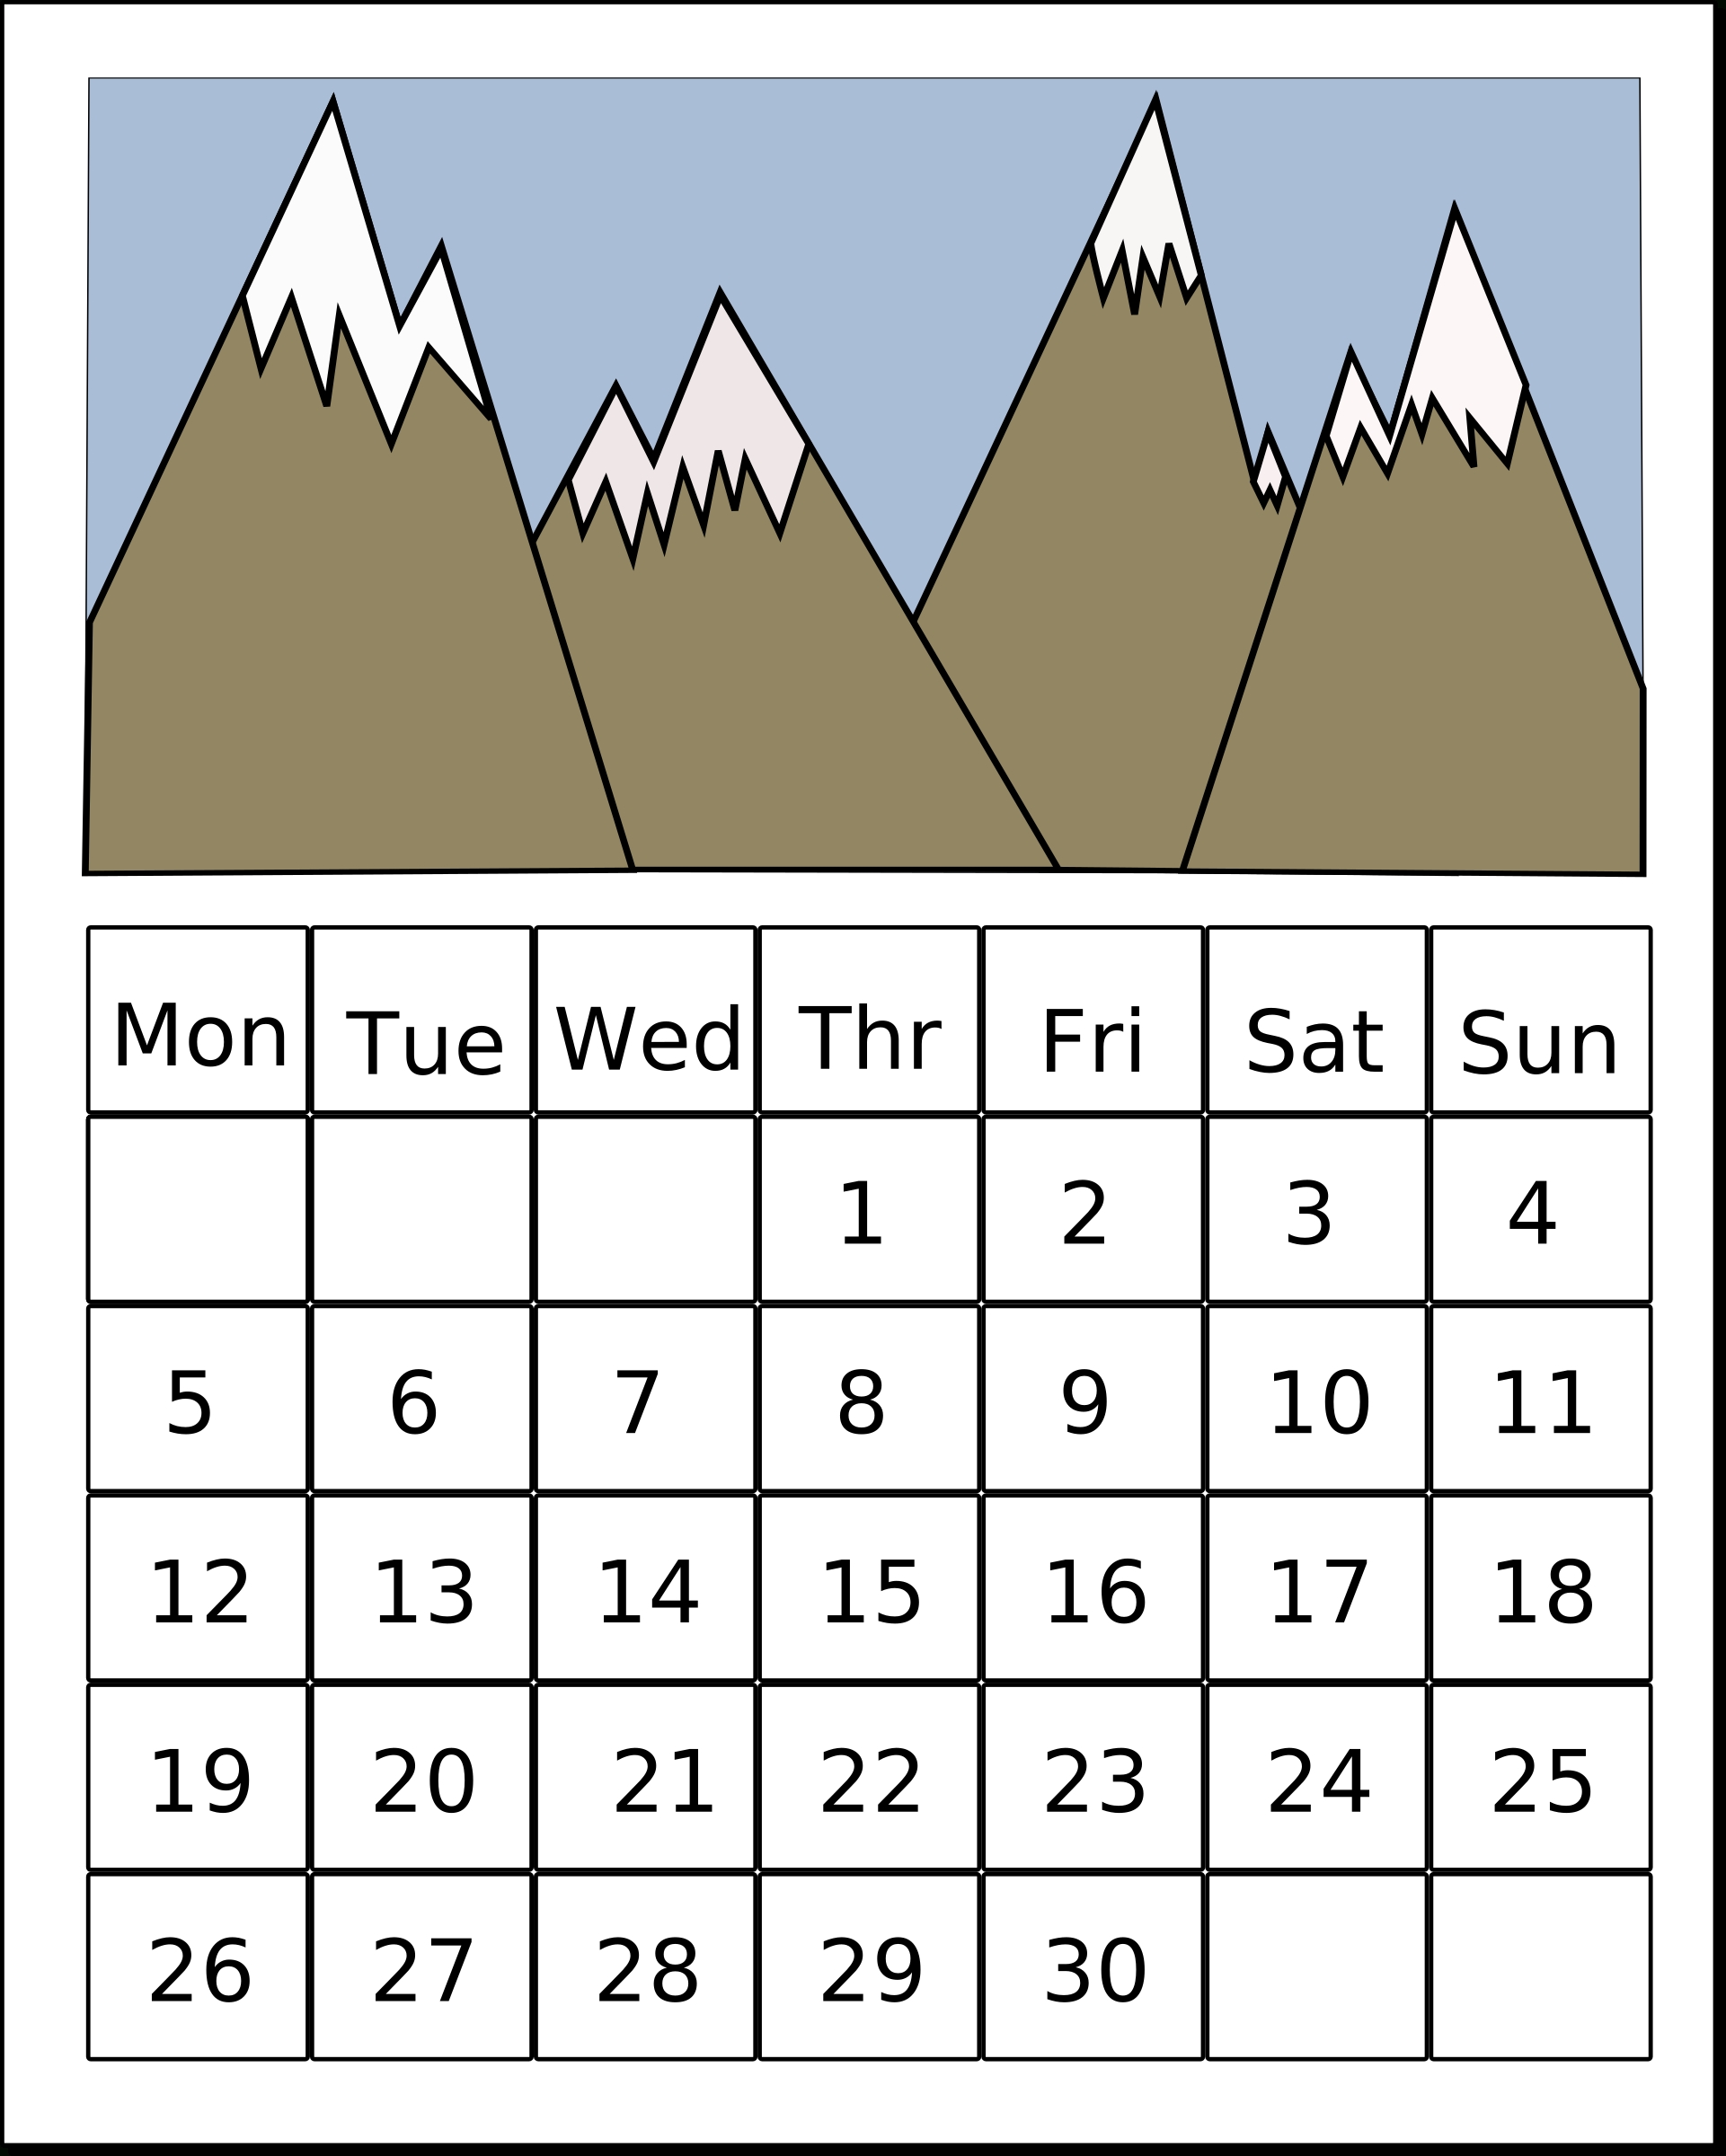 Calendar Of Stem-Related Seasonal Events And Holidays | Nise School Calendar With Legal Holidays